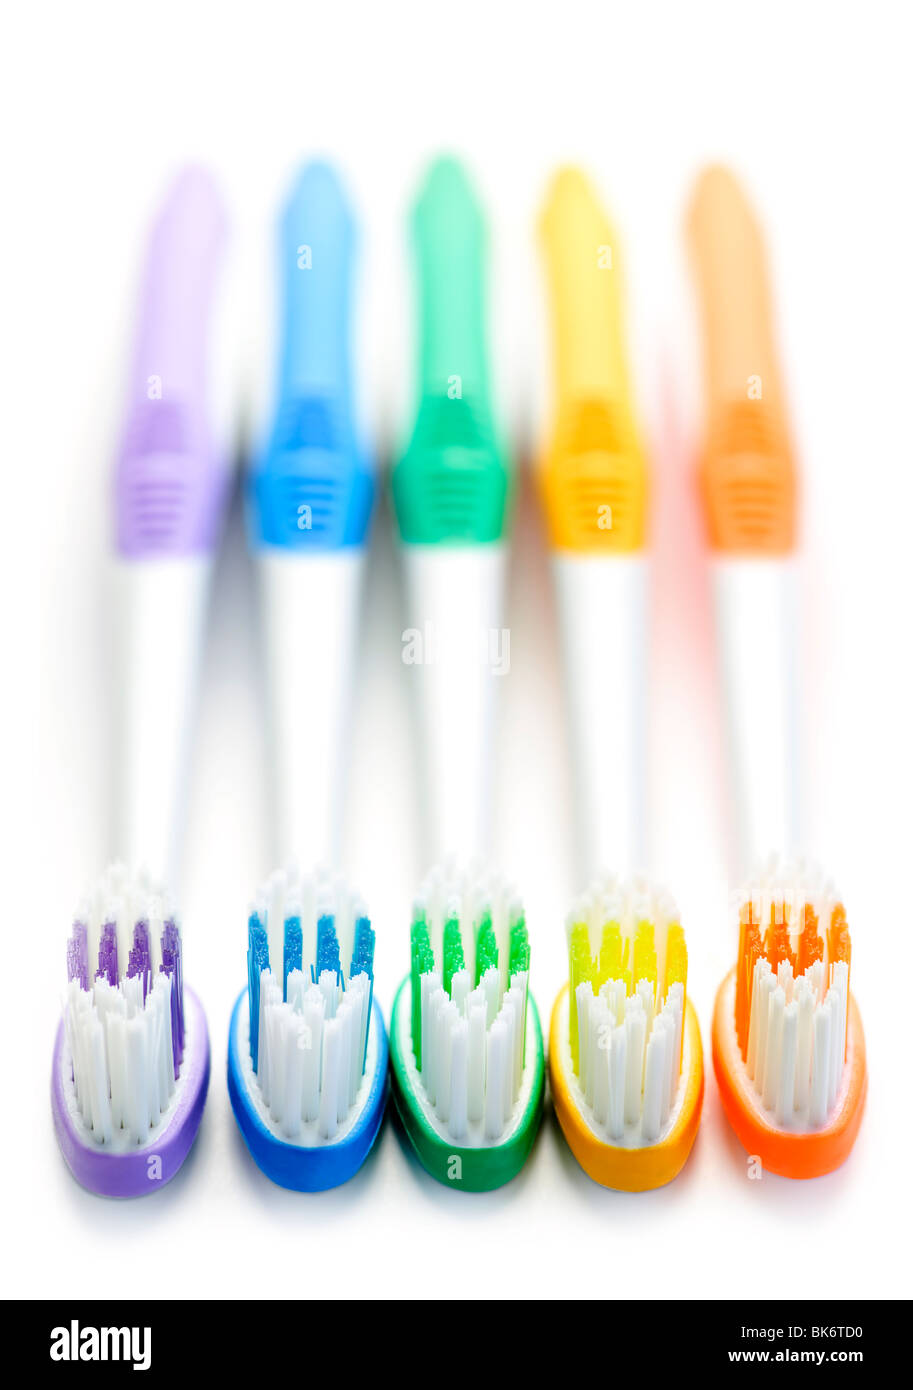 Close up of multicolored toothbrushes on white background Stock Photo